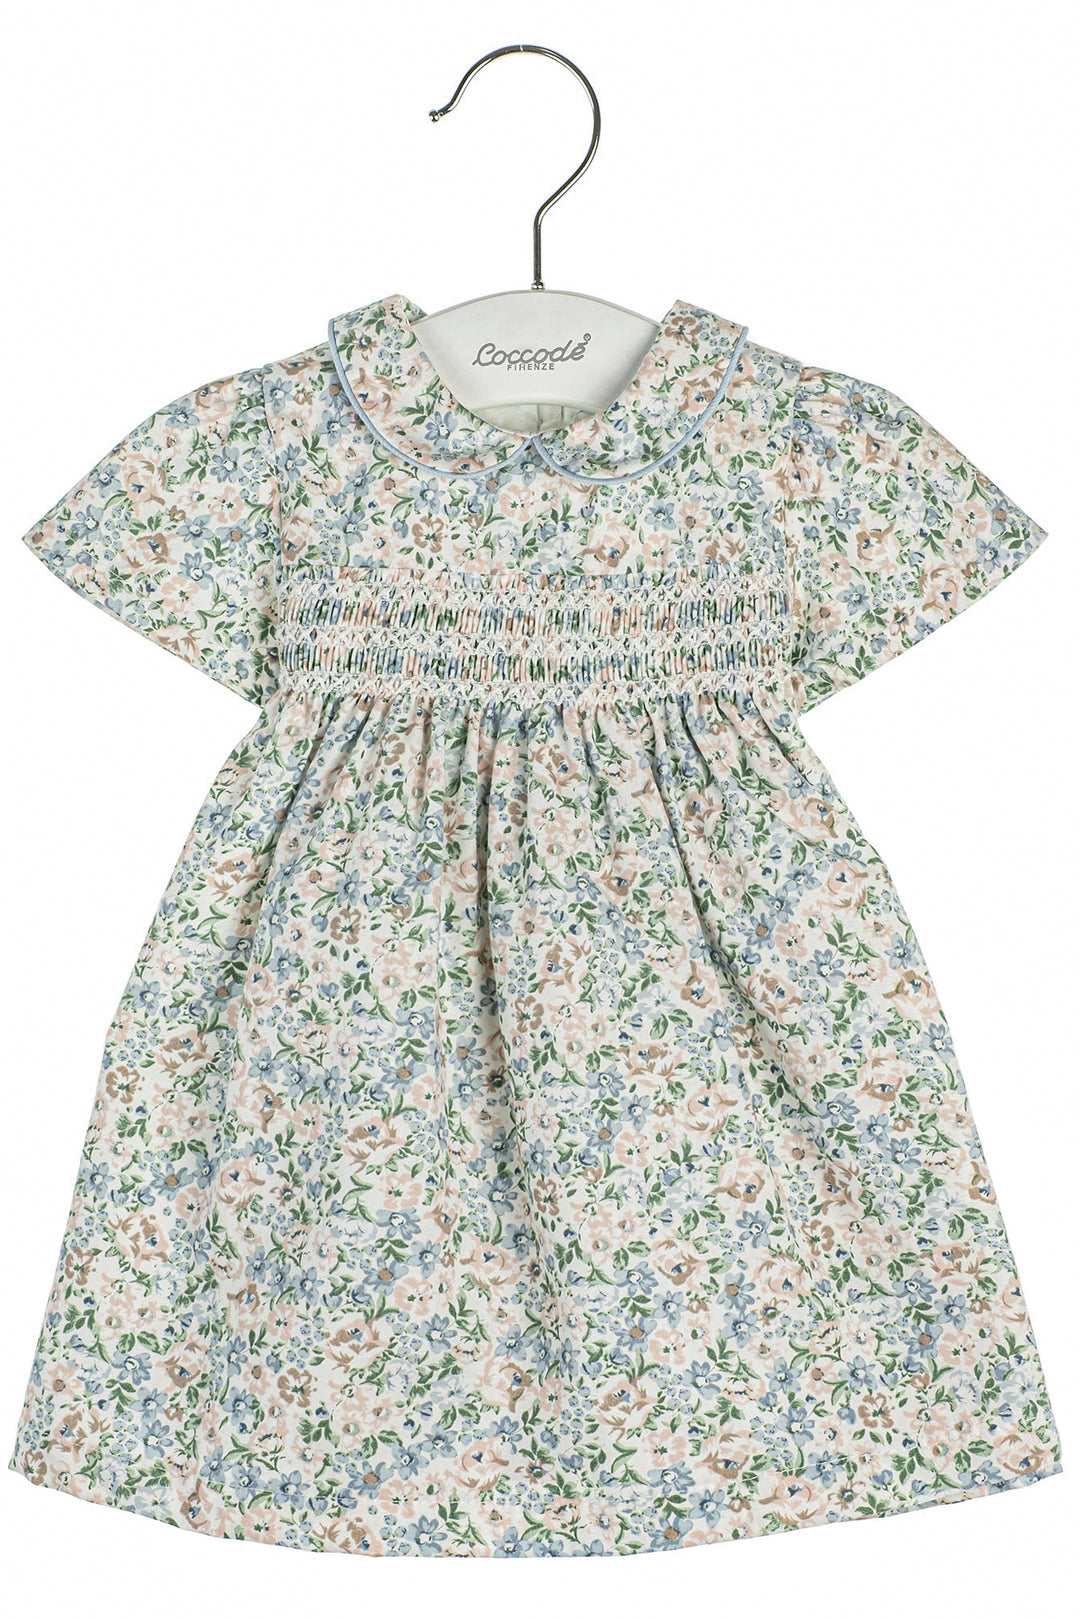 Coccodè "Neesha" Blue Floral Smocked Dress | iphoneandroidapplications